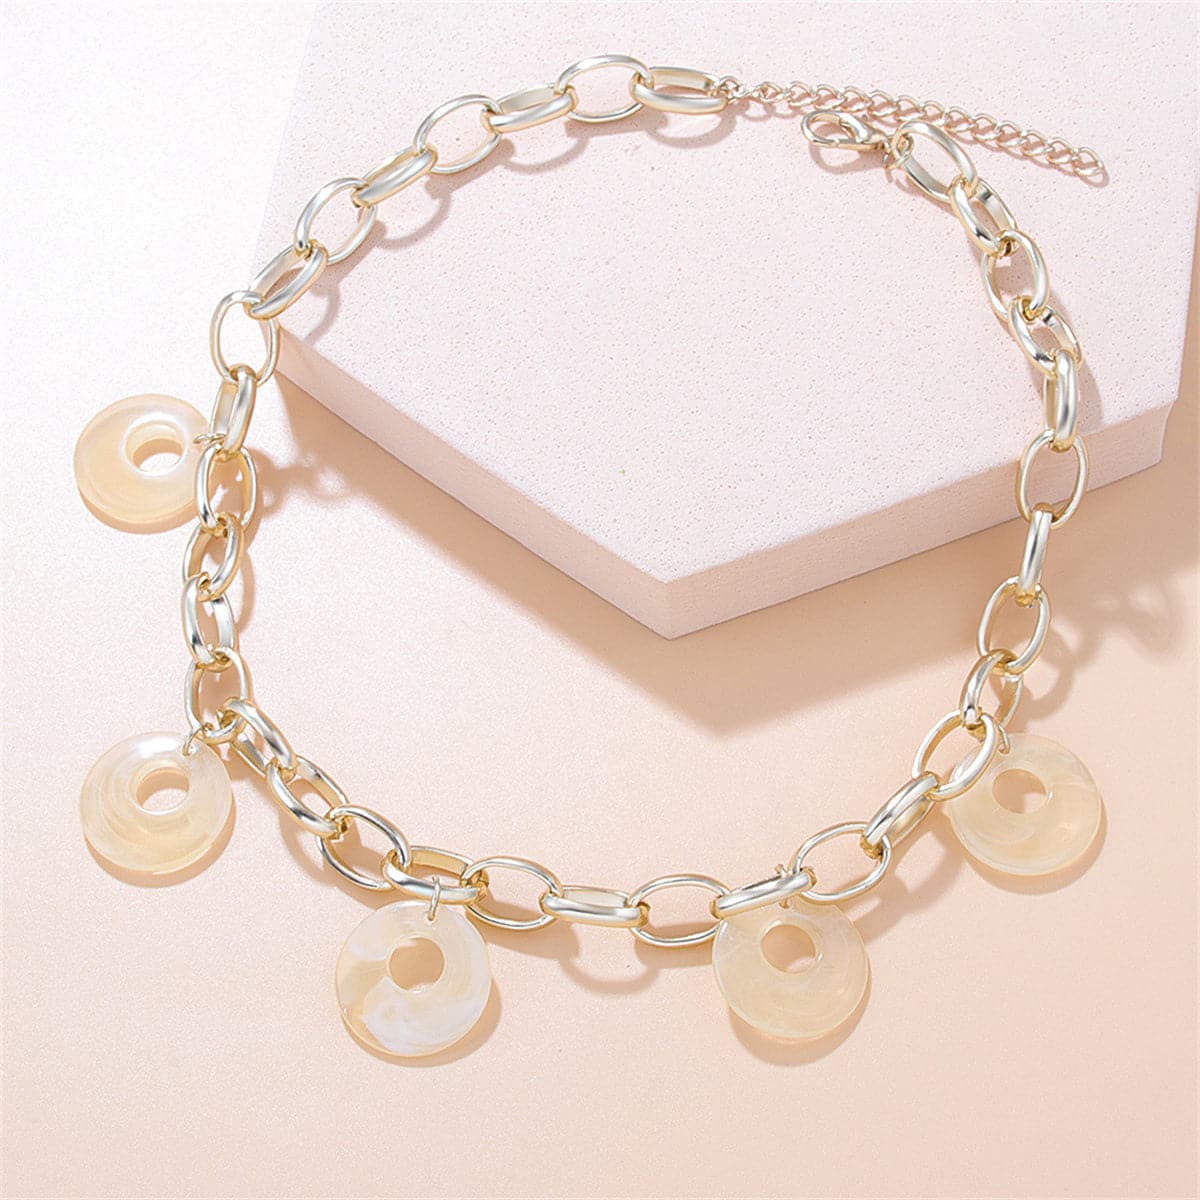 Beige Resin & 18K Gold-Plated Round Station Necklace